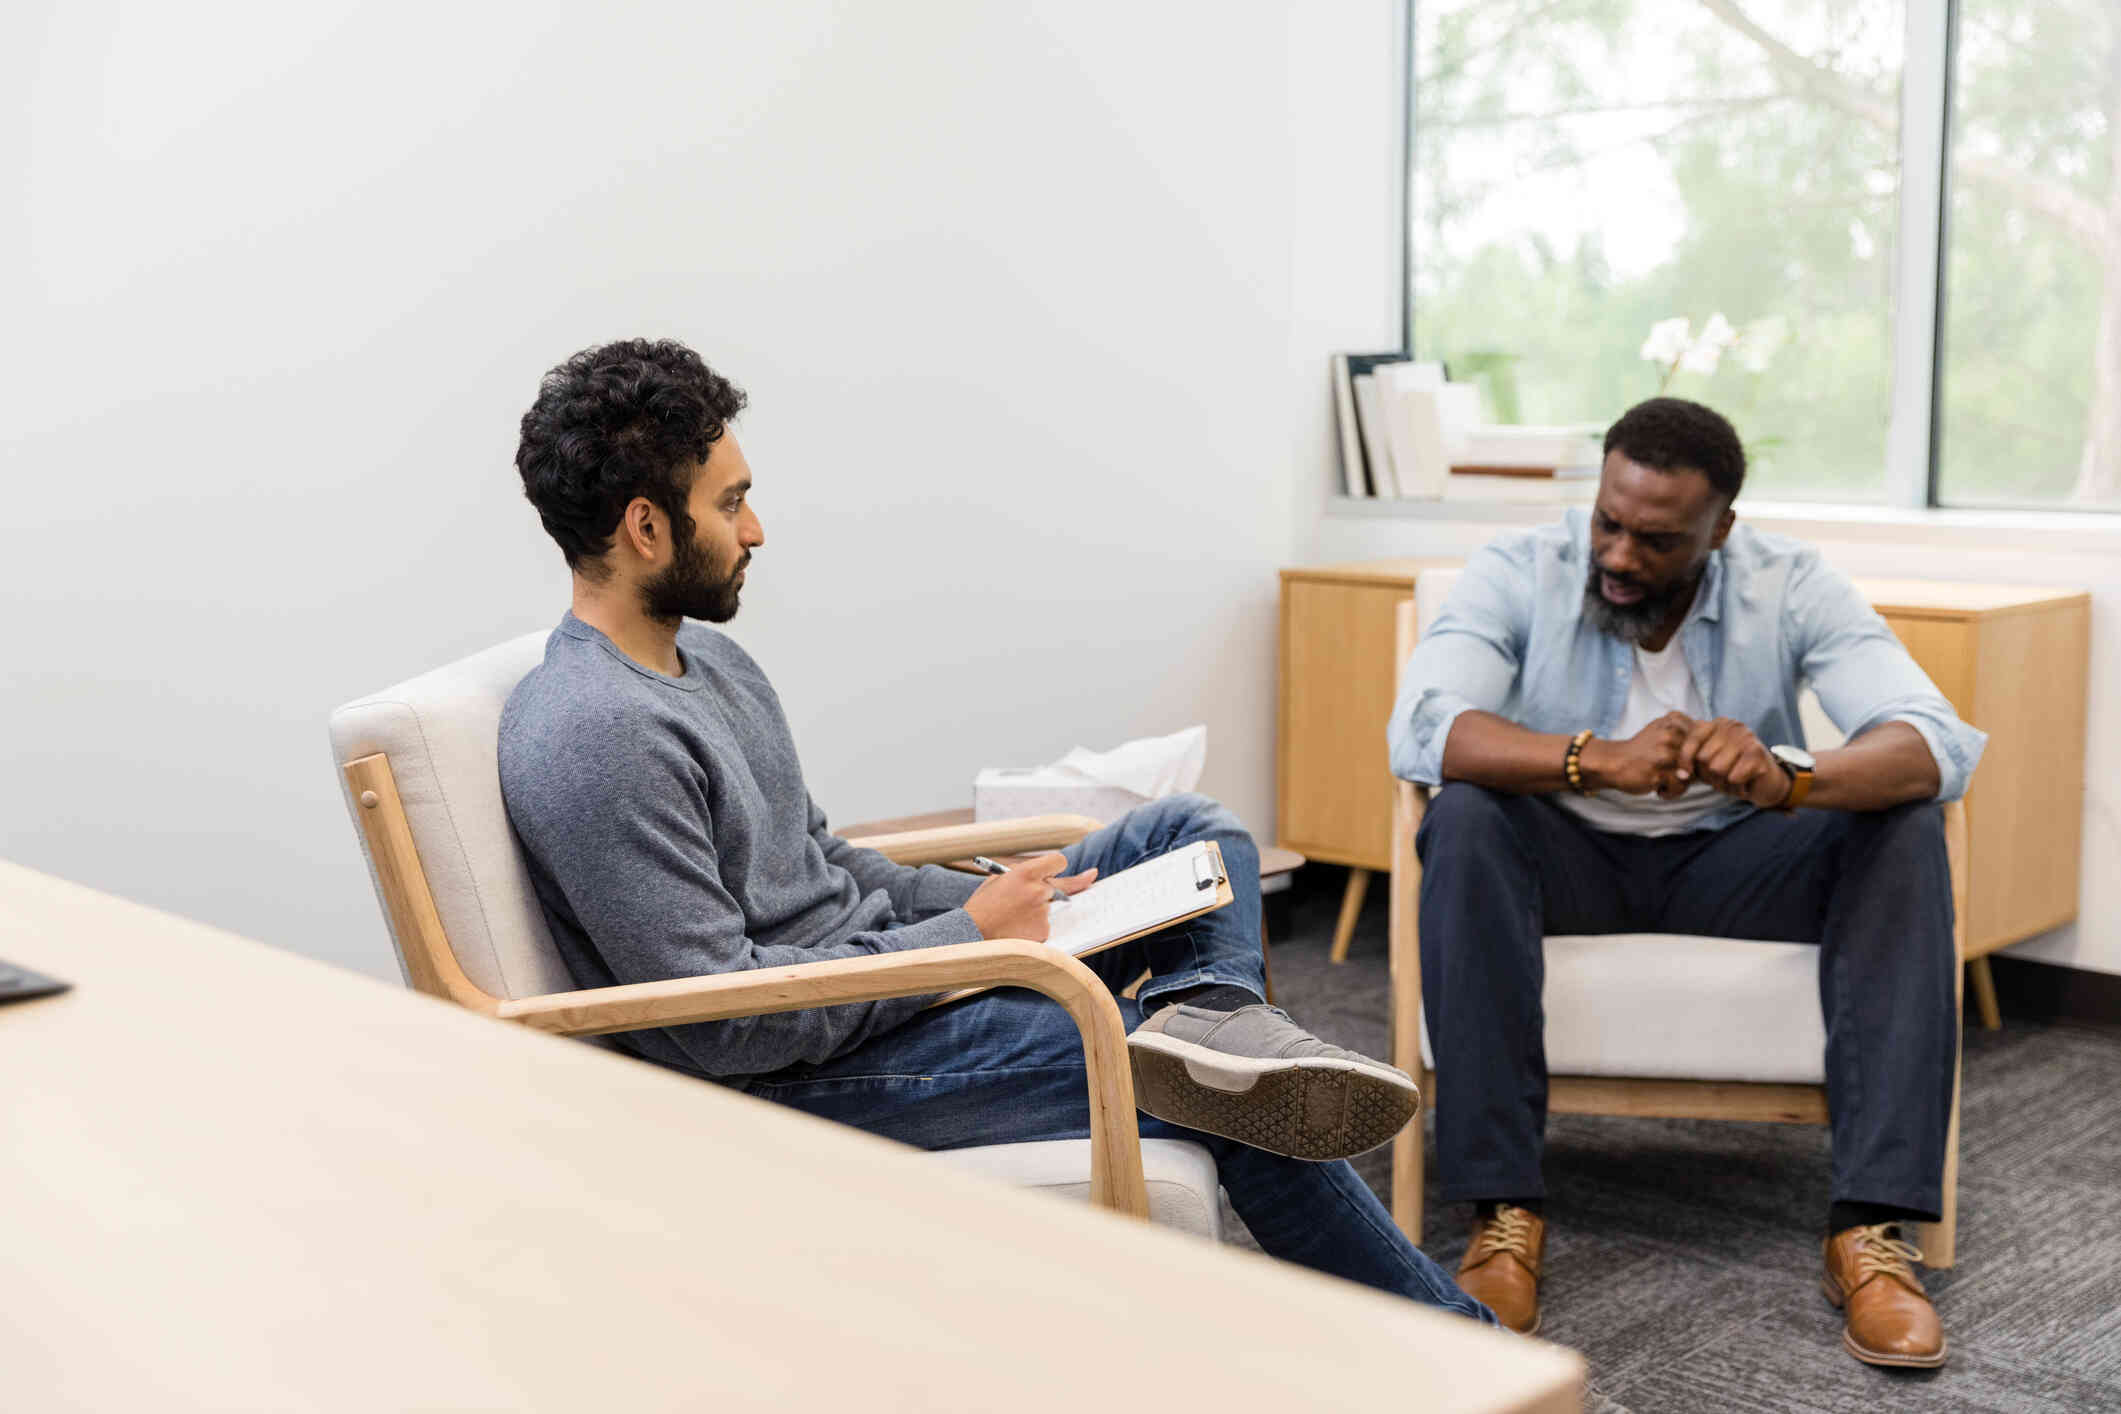 A middle aged man looks distressed as he sits huncehd over in a chair and talks to the male therapist sitting across from hm during a therapy session.